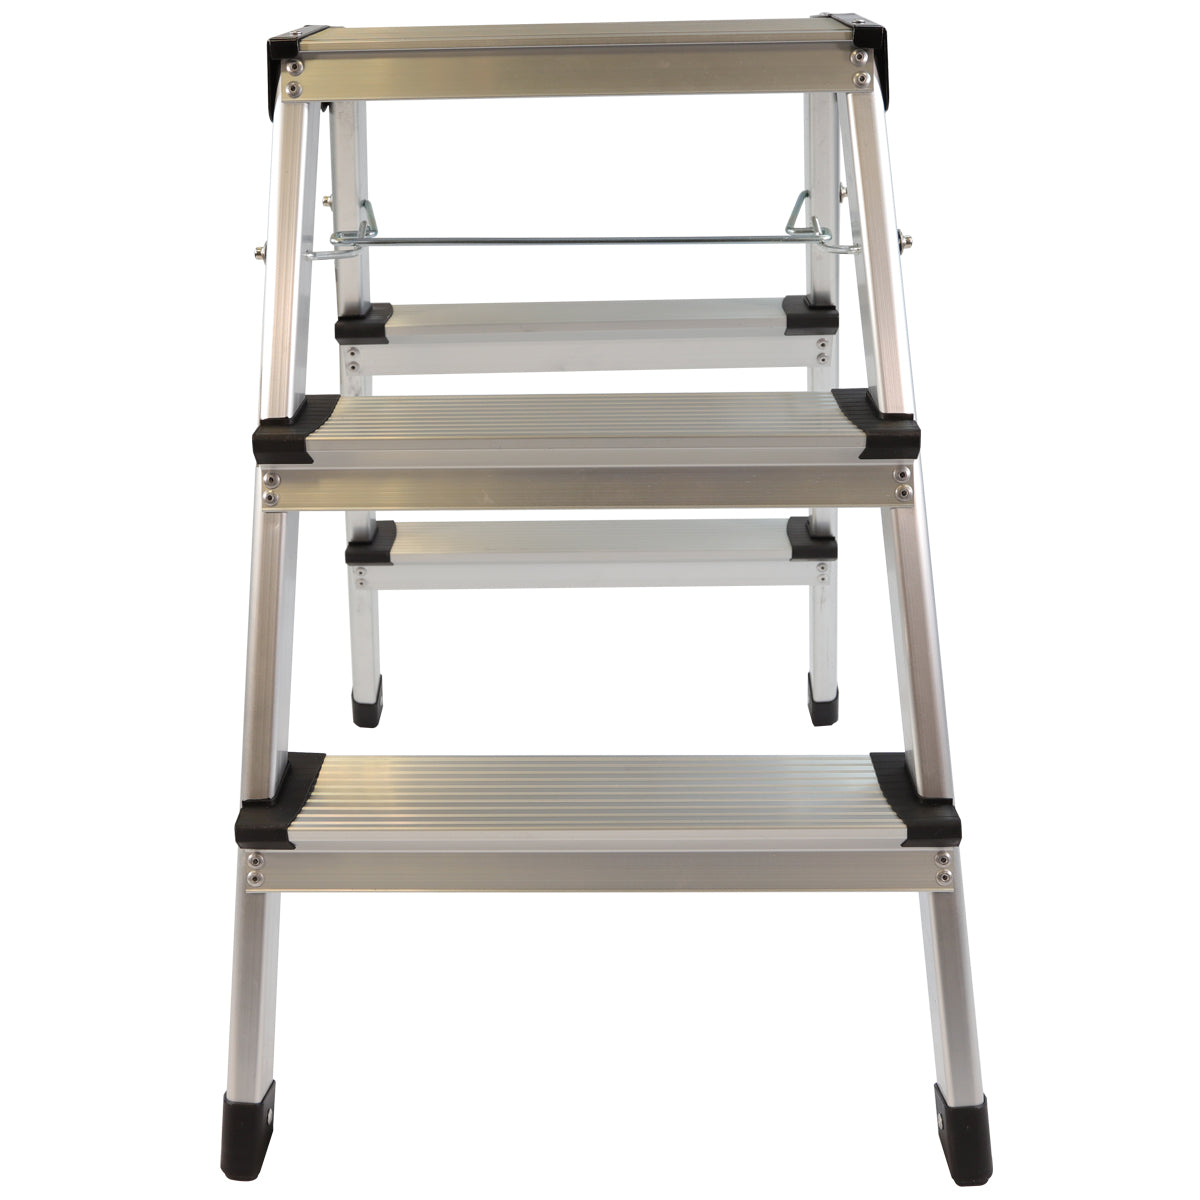 Excel Heavy Duty Fibreglass 4 Tread Ladder with 3 Step Hop Up Ladder